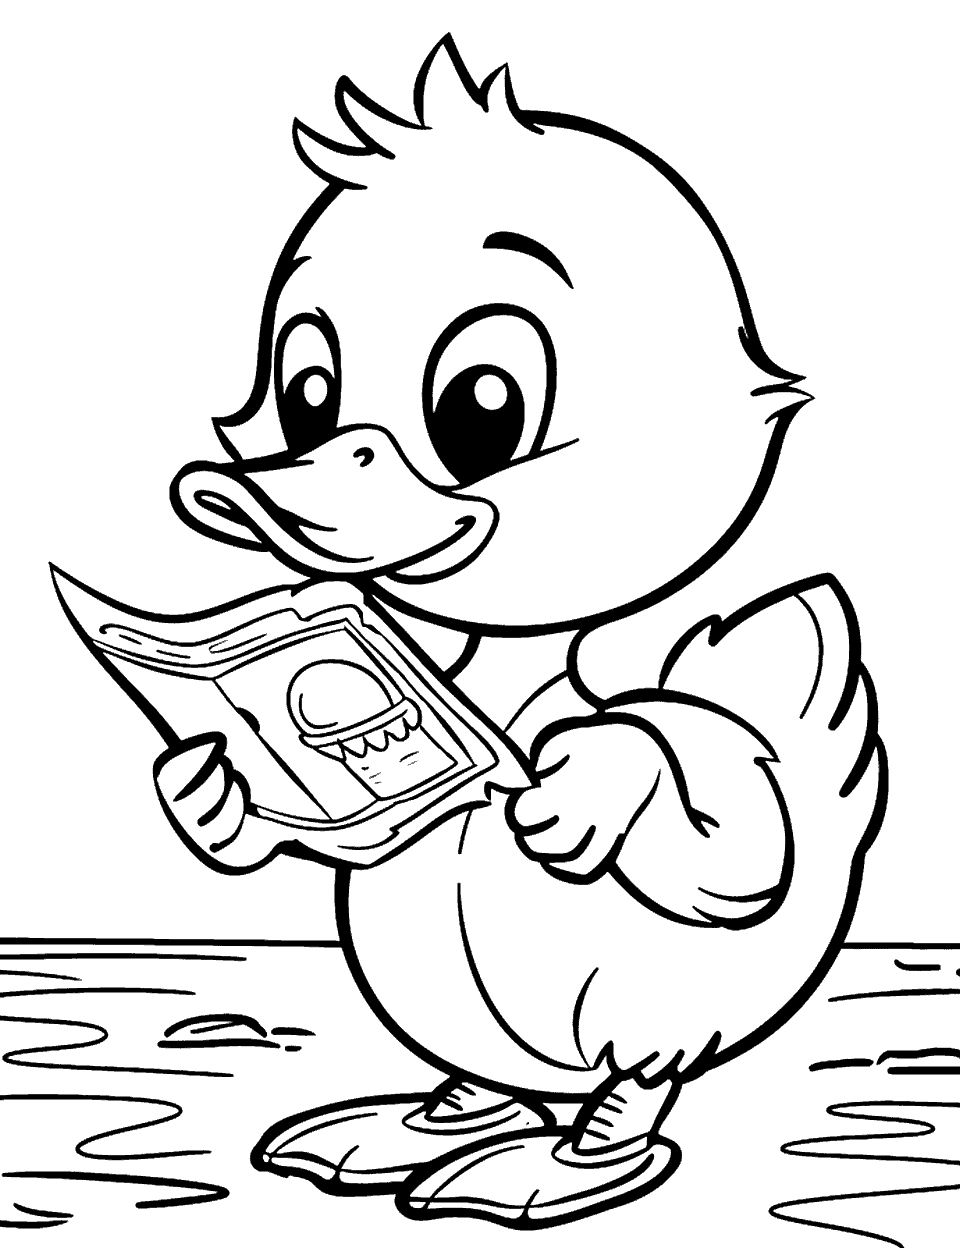 Duck with a Treasure Map Coloring Page - A cute duck holding a treasure map, looking excited about an adventure.